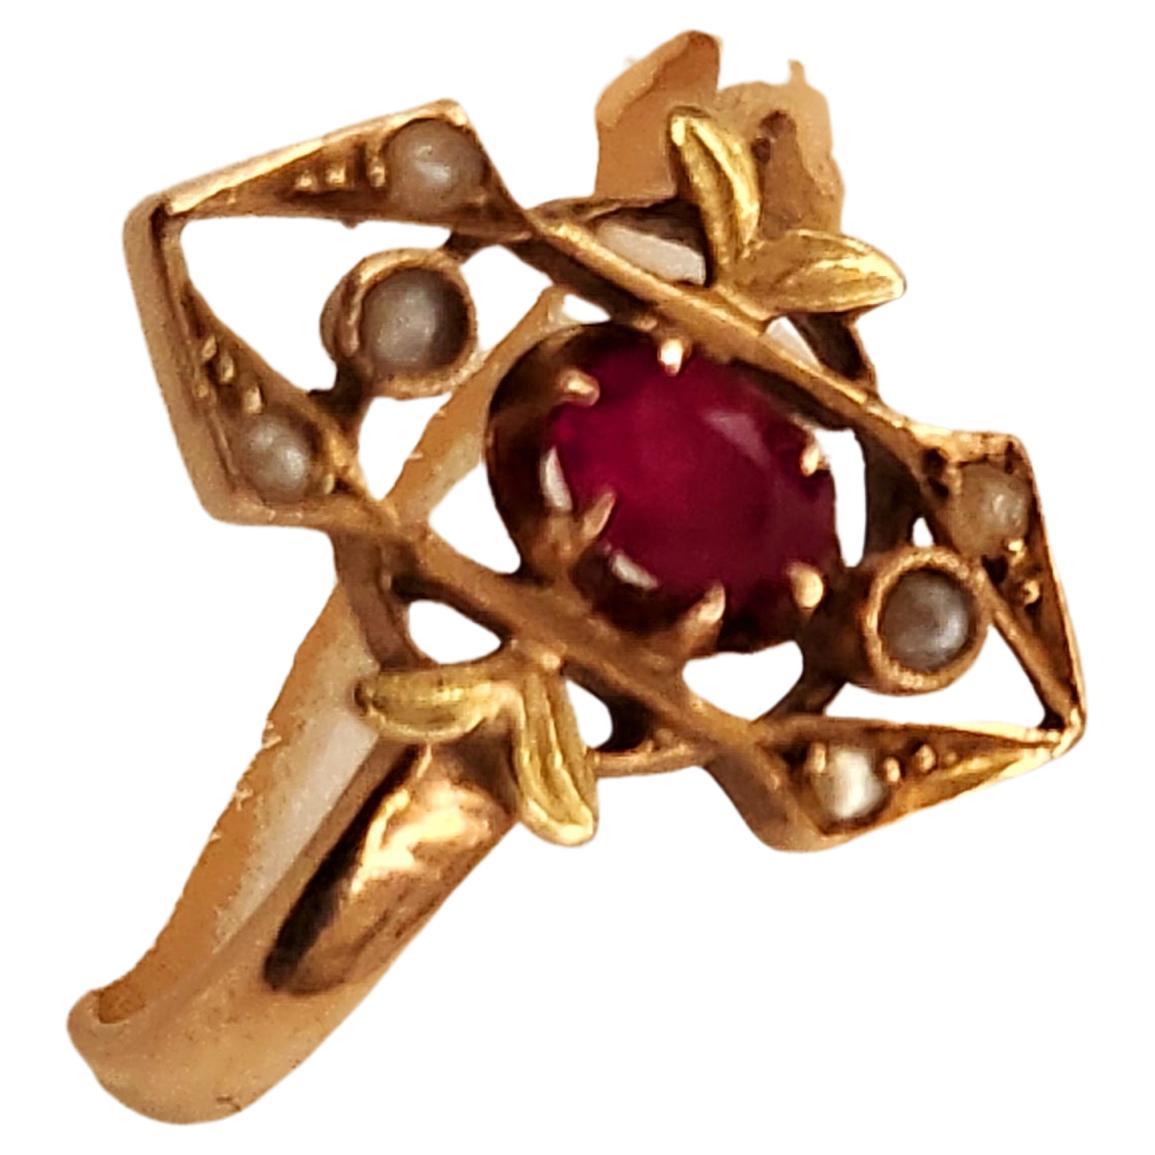 Antique 14k gold ring on gemotratic designe centeted with 1 natural oval cut ruby stone flanked with old seed pearls ring was made in moscow during the imperial russian era 1907/1917.c hall marked 56 imperial russian gold standard and moscow assay